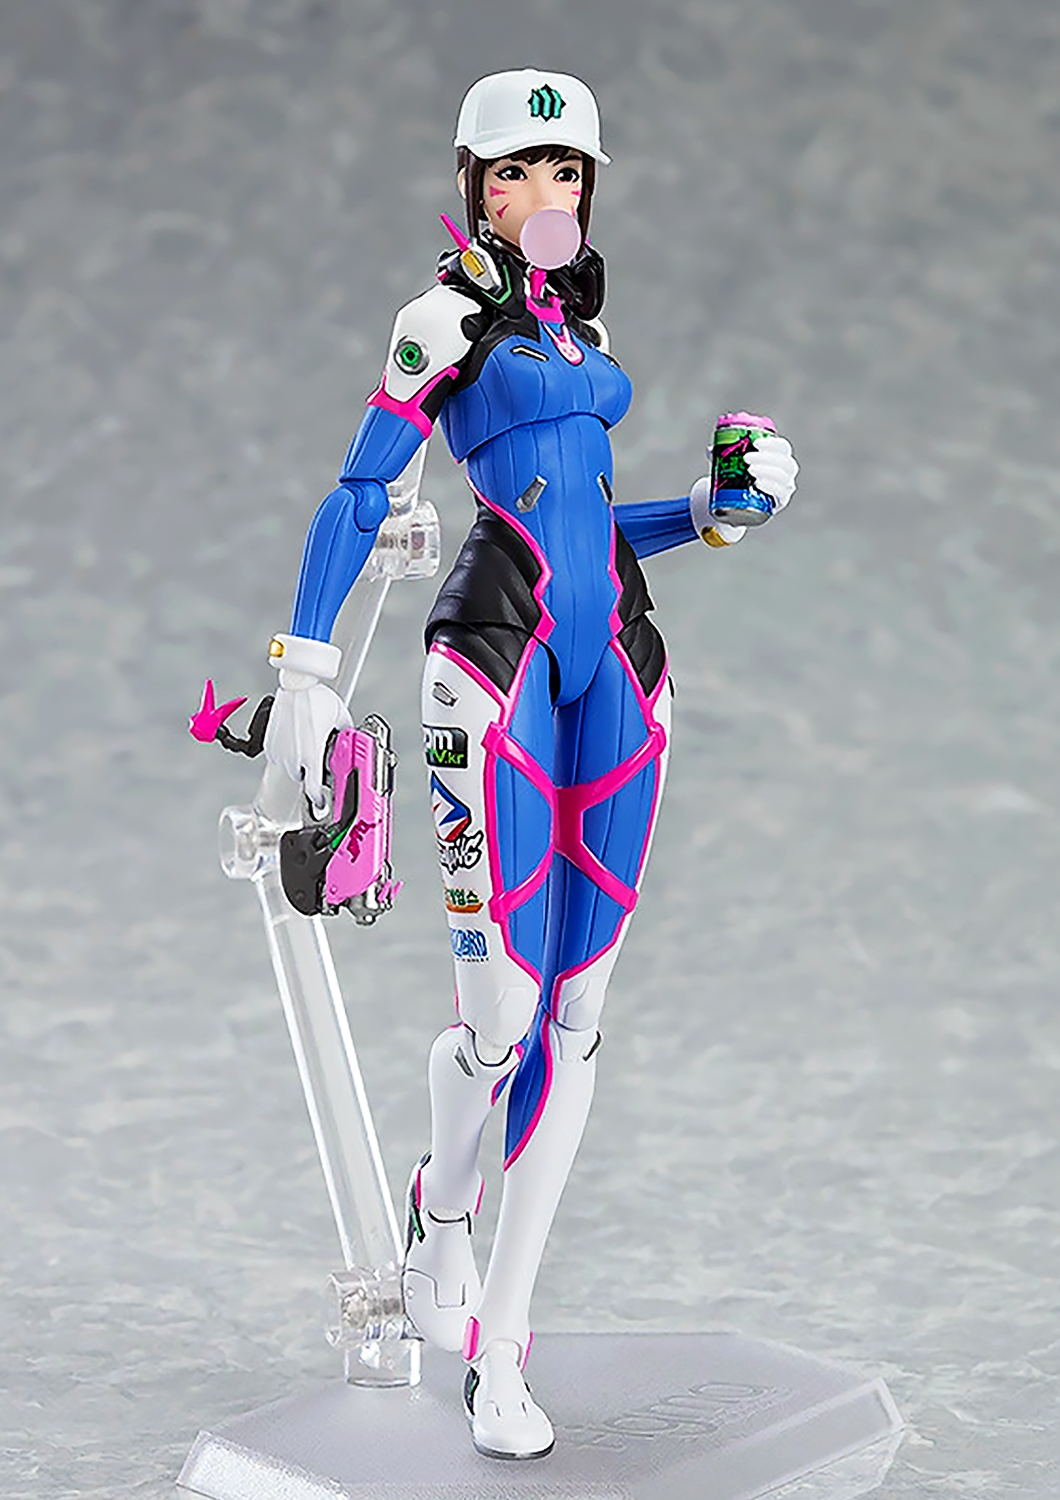 GOODSMILE FIGMA OVERWATCH D.VA - 90623 - Anotoys Collectibles